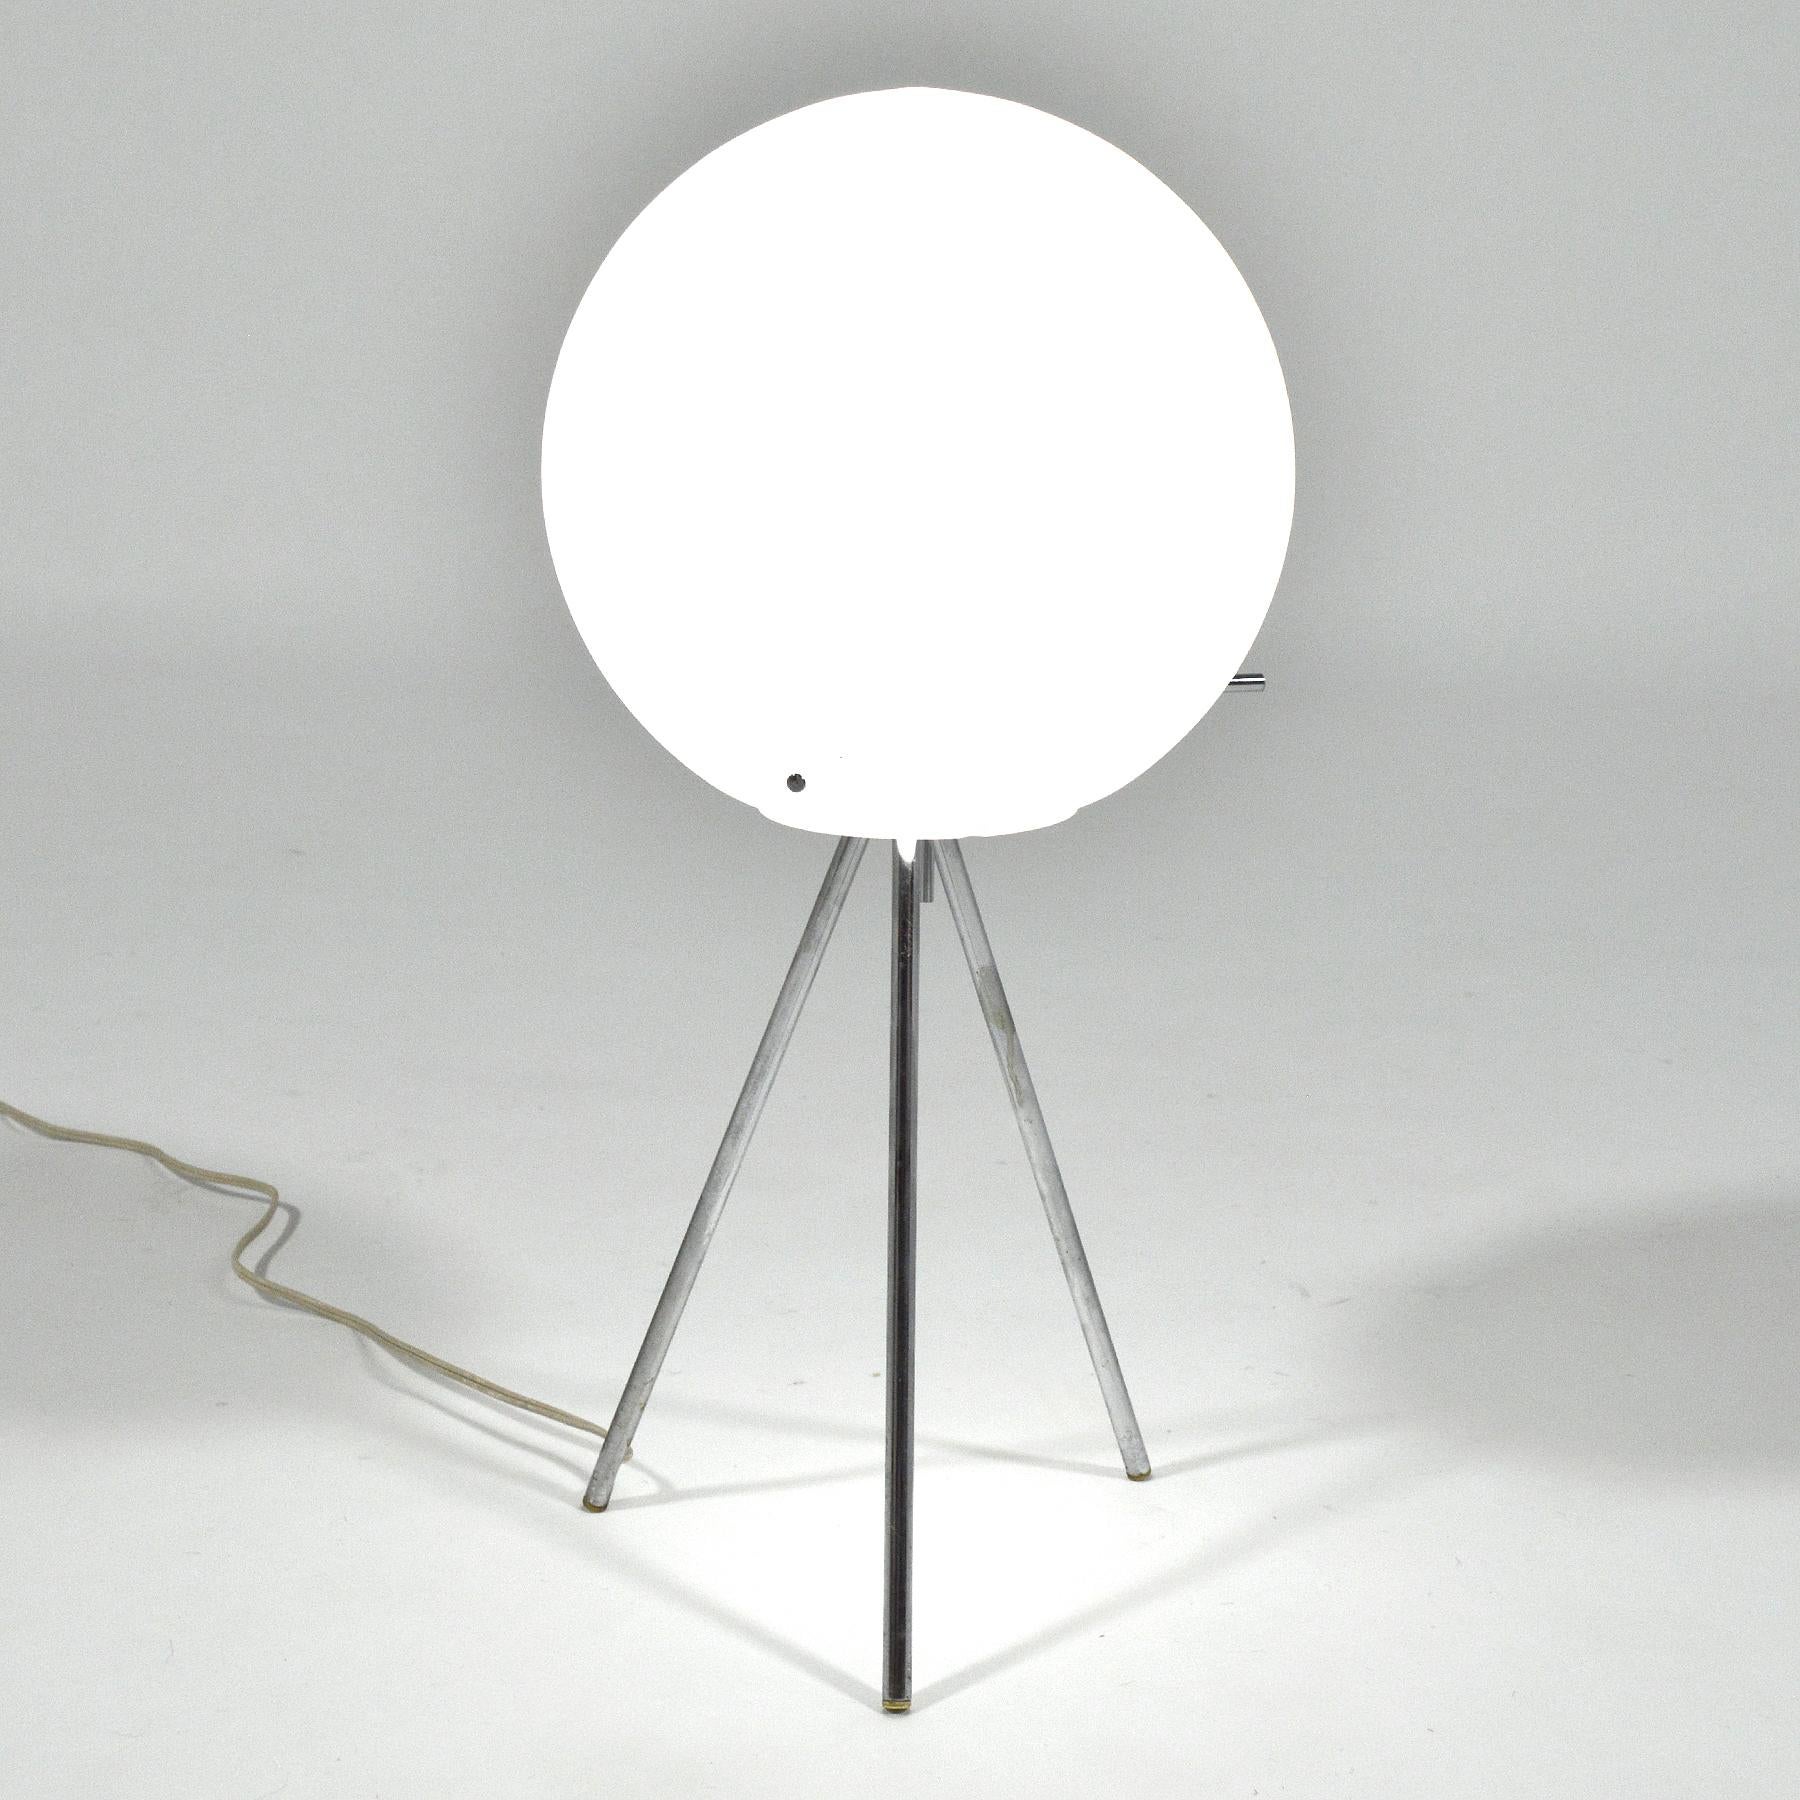 A fantastic representation of innovative lighting design and the mid-century obsession with the space race, this table lamp by Paul Mayen for Habitat features a glass globe suspended by a tripod base with arms that pierce the glass. The pull switch